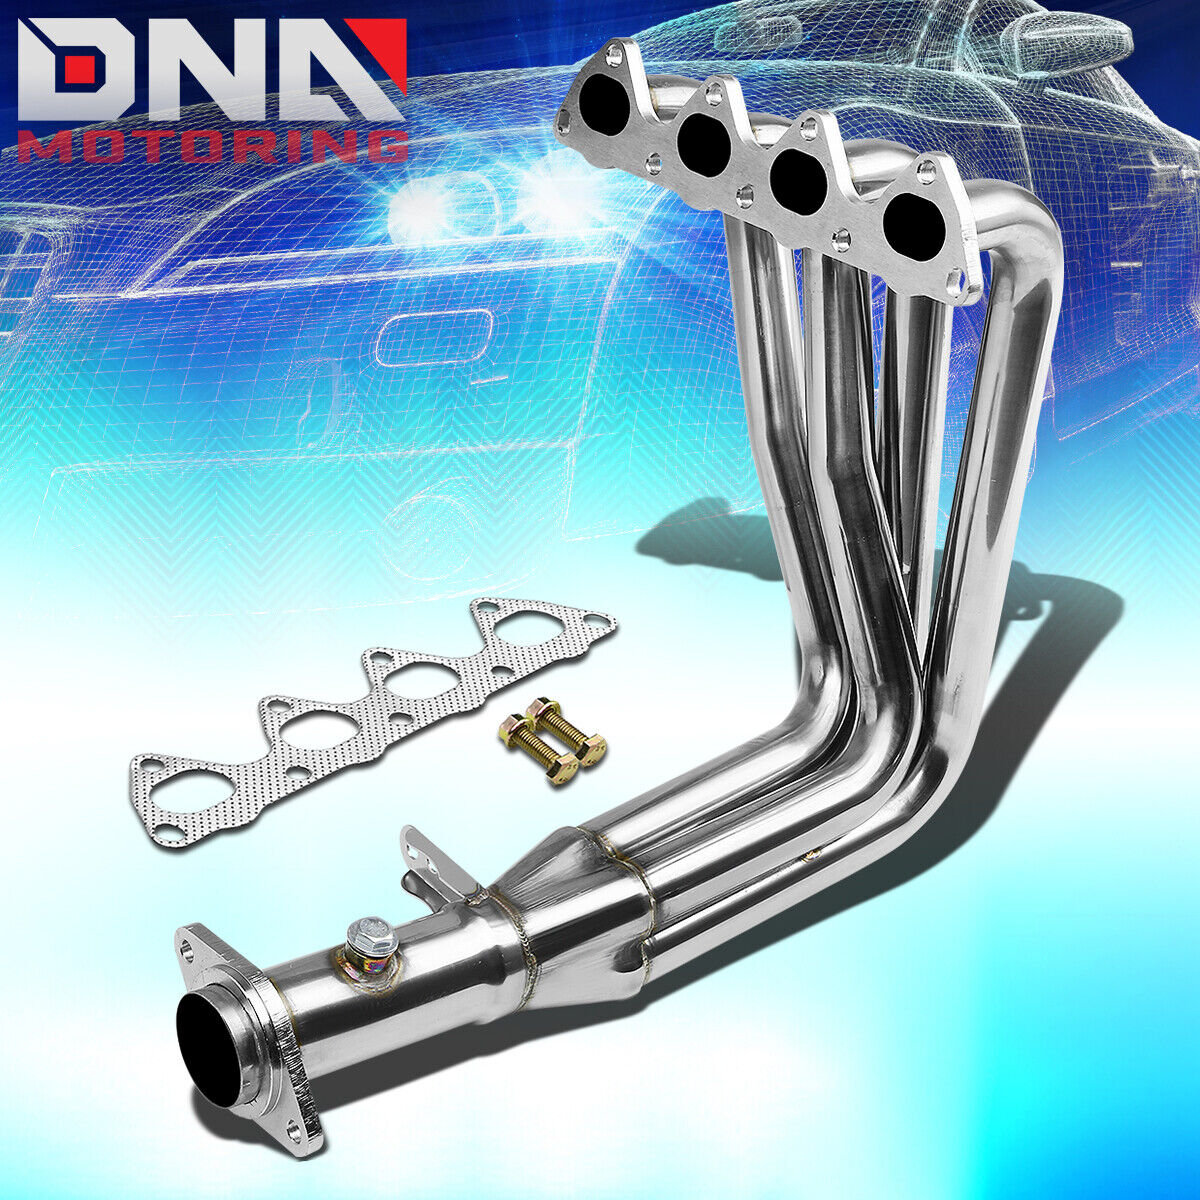 STAINLESS STEEL 4-1 HEADER FOR 94-01 INTEGRA GSR/TYPE-R/Si 1.8 EXHAUST/MANIFOLD